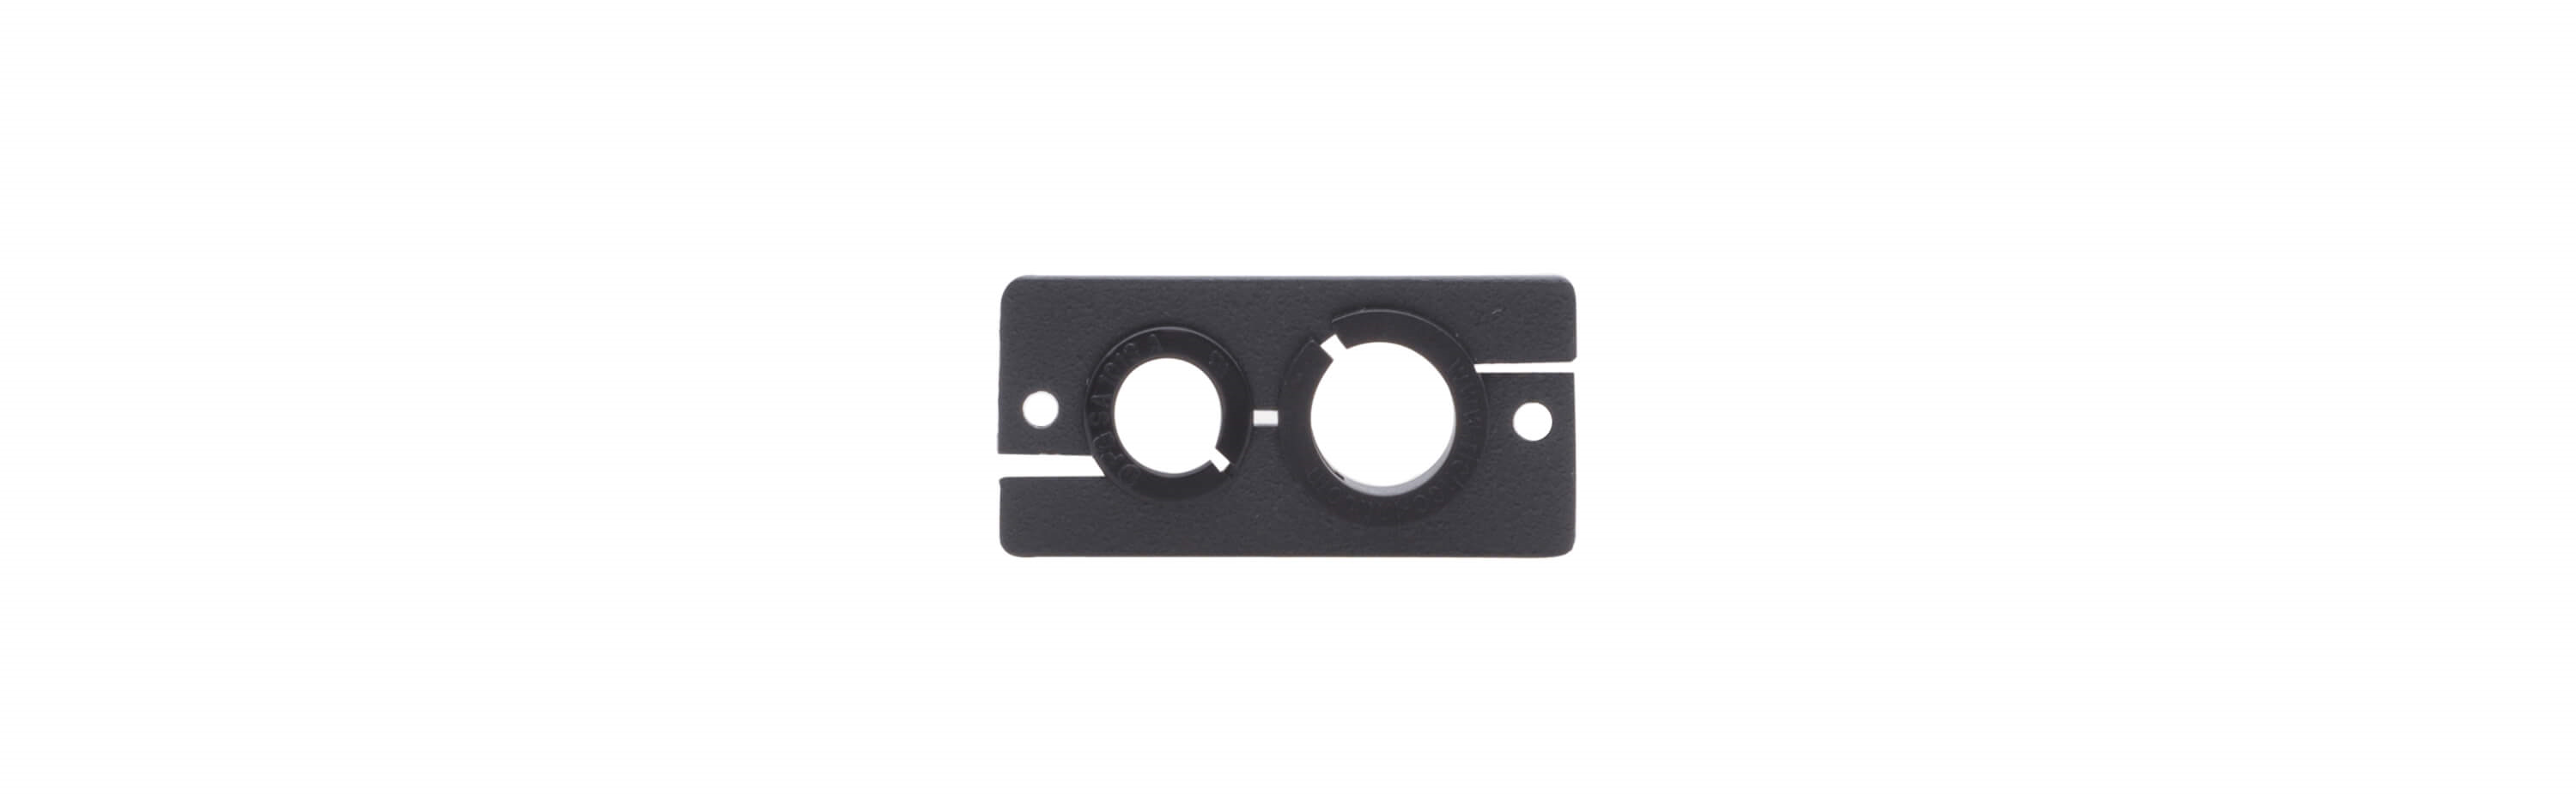 WCP-21(B) Wall Plate Insert — Two–Sized Cable Pass–Through, Black